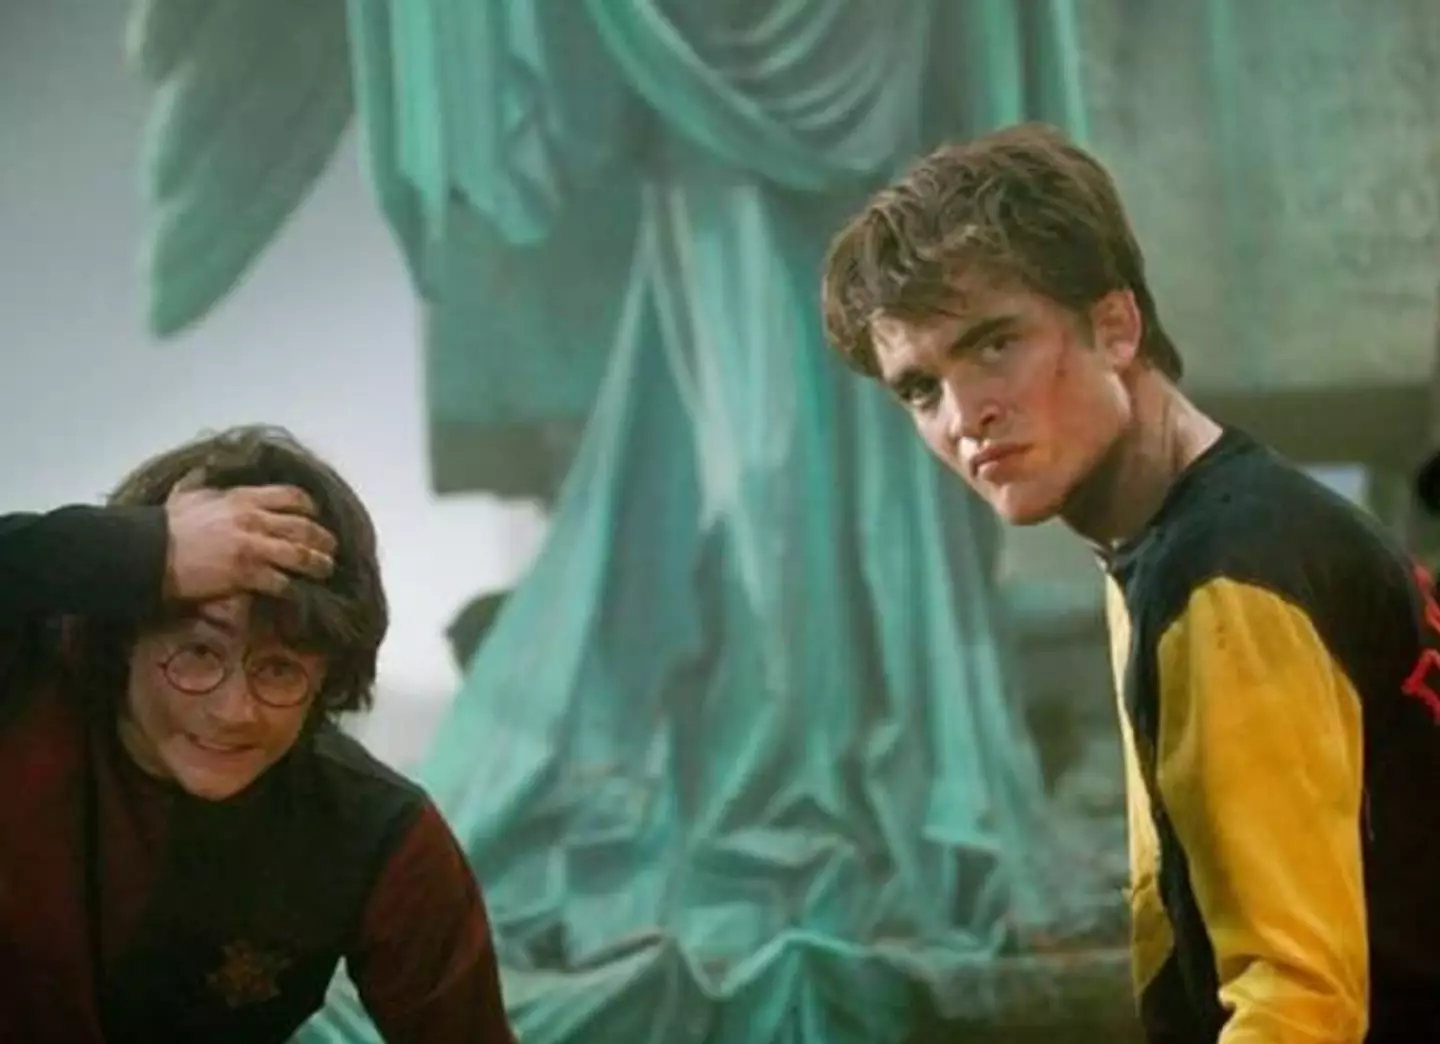 Robert Pattinson Opens Up About Role of Cedric Diggory.